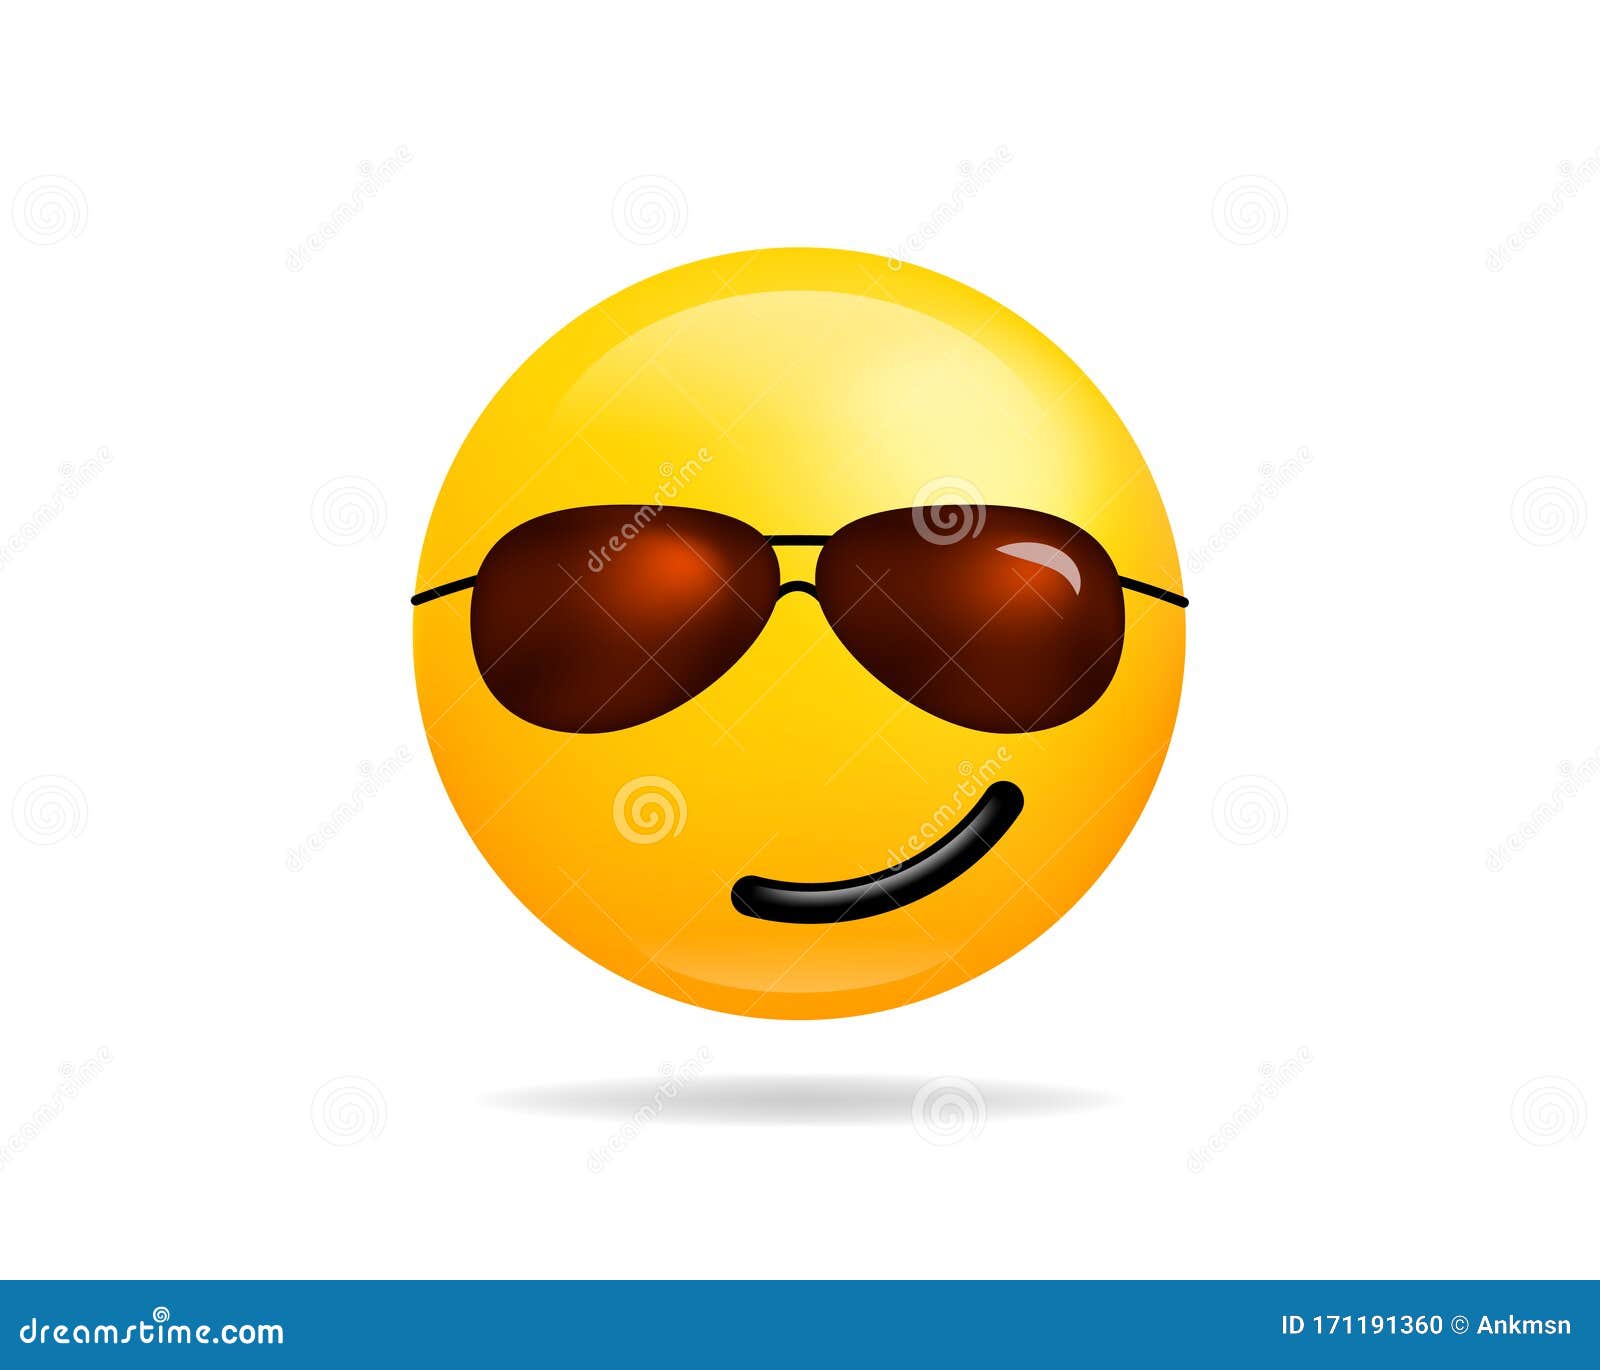 Emoji Icon Vector Symbol. Smiley Face with Sunglasses Yellow Cartoon Character Stock Vector - ball, mouth: 171191360